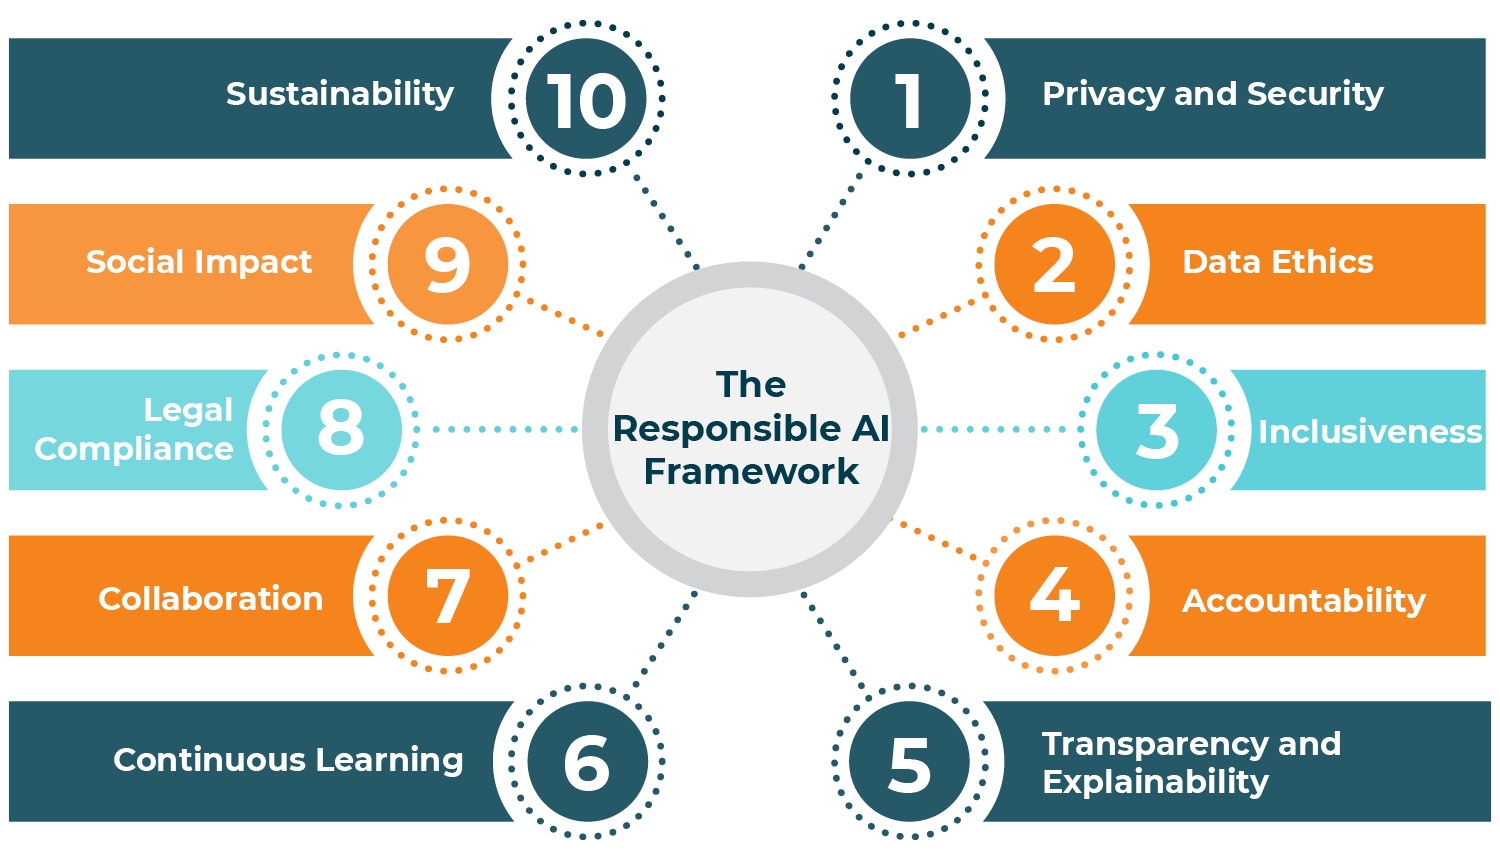 This image and the text below list the main tenets of the Responsible AI Framework